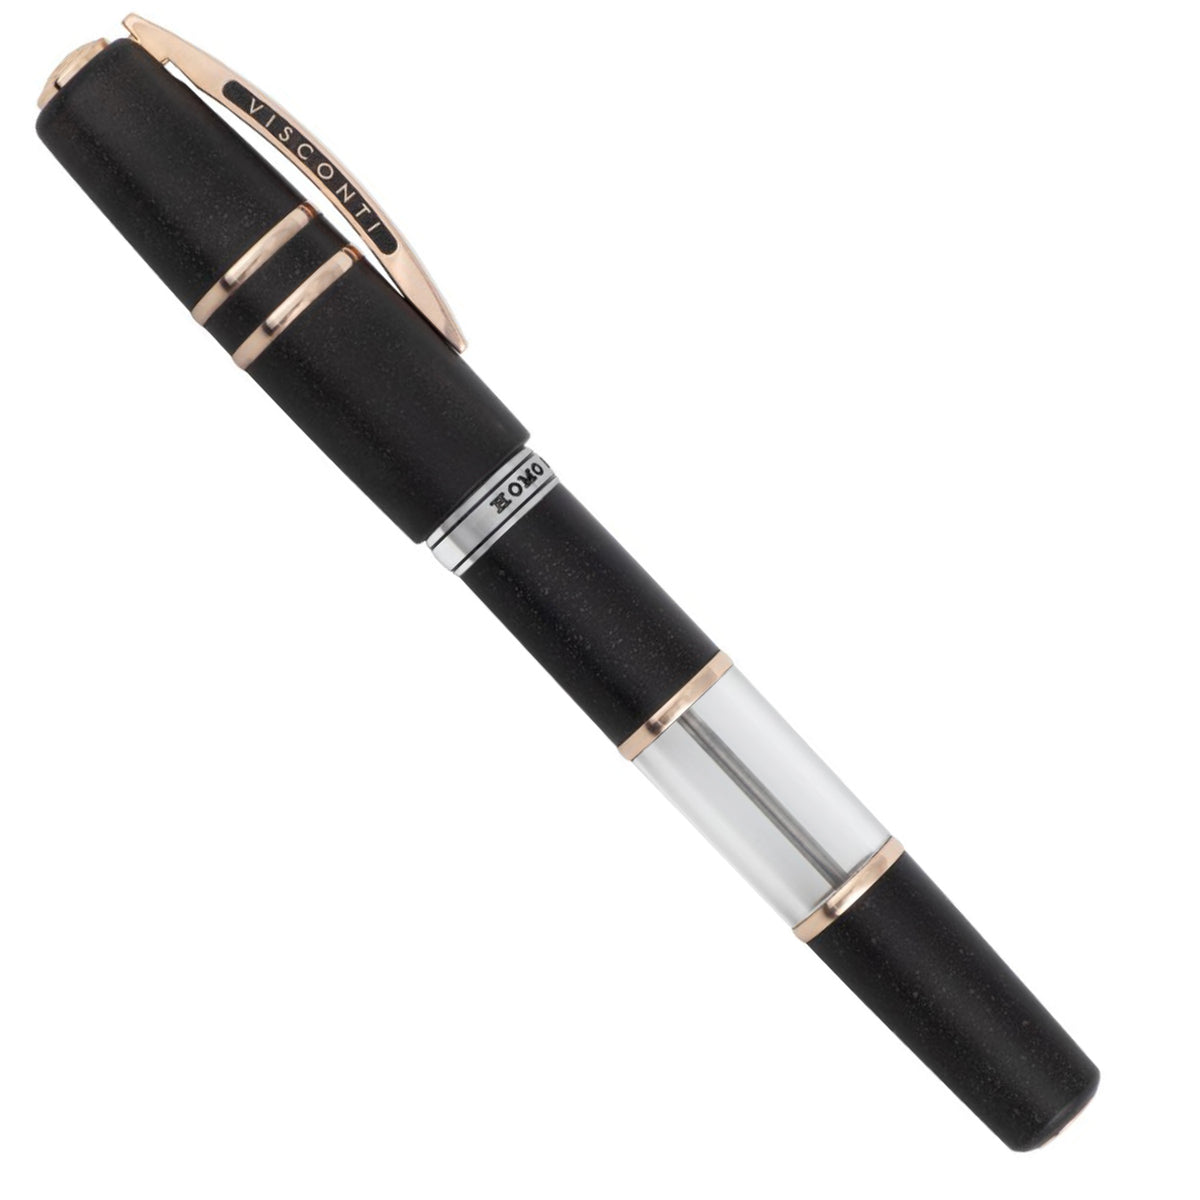 A black and rose gold Coles of London Visconti Homo Sapiens Crystal Dream Fountain Pen on a white background.